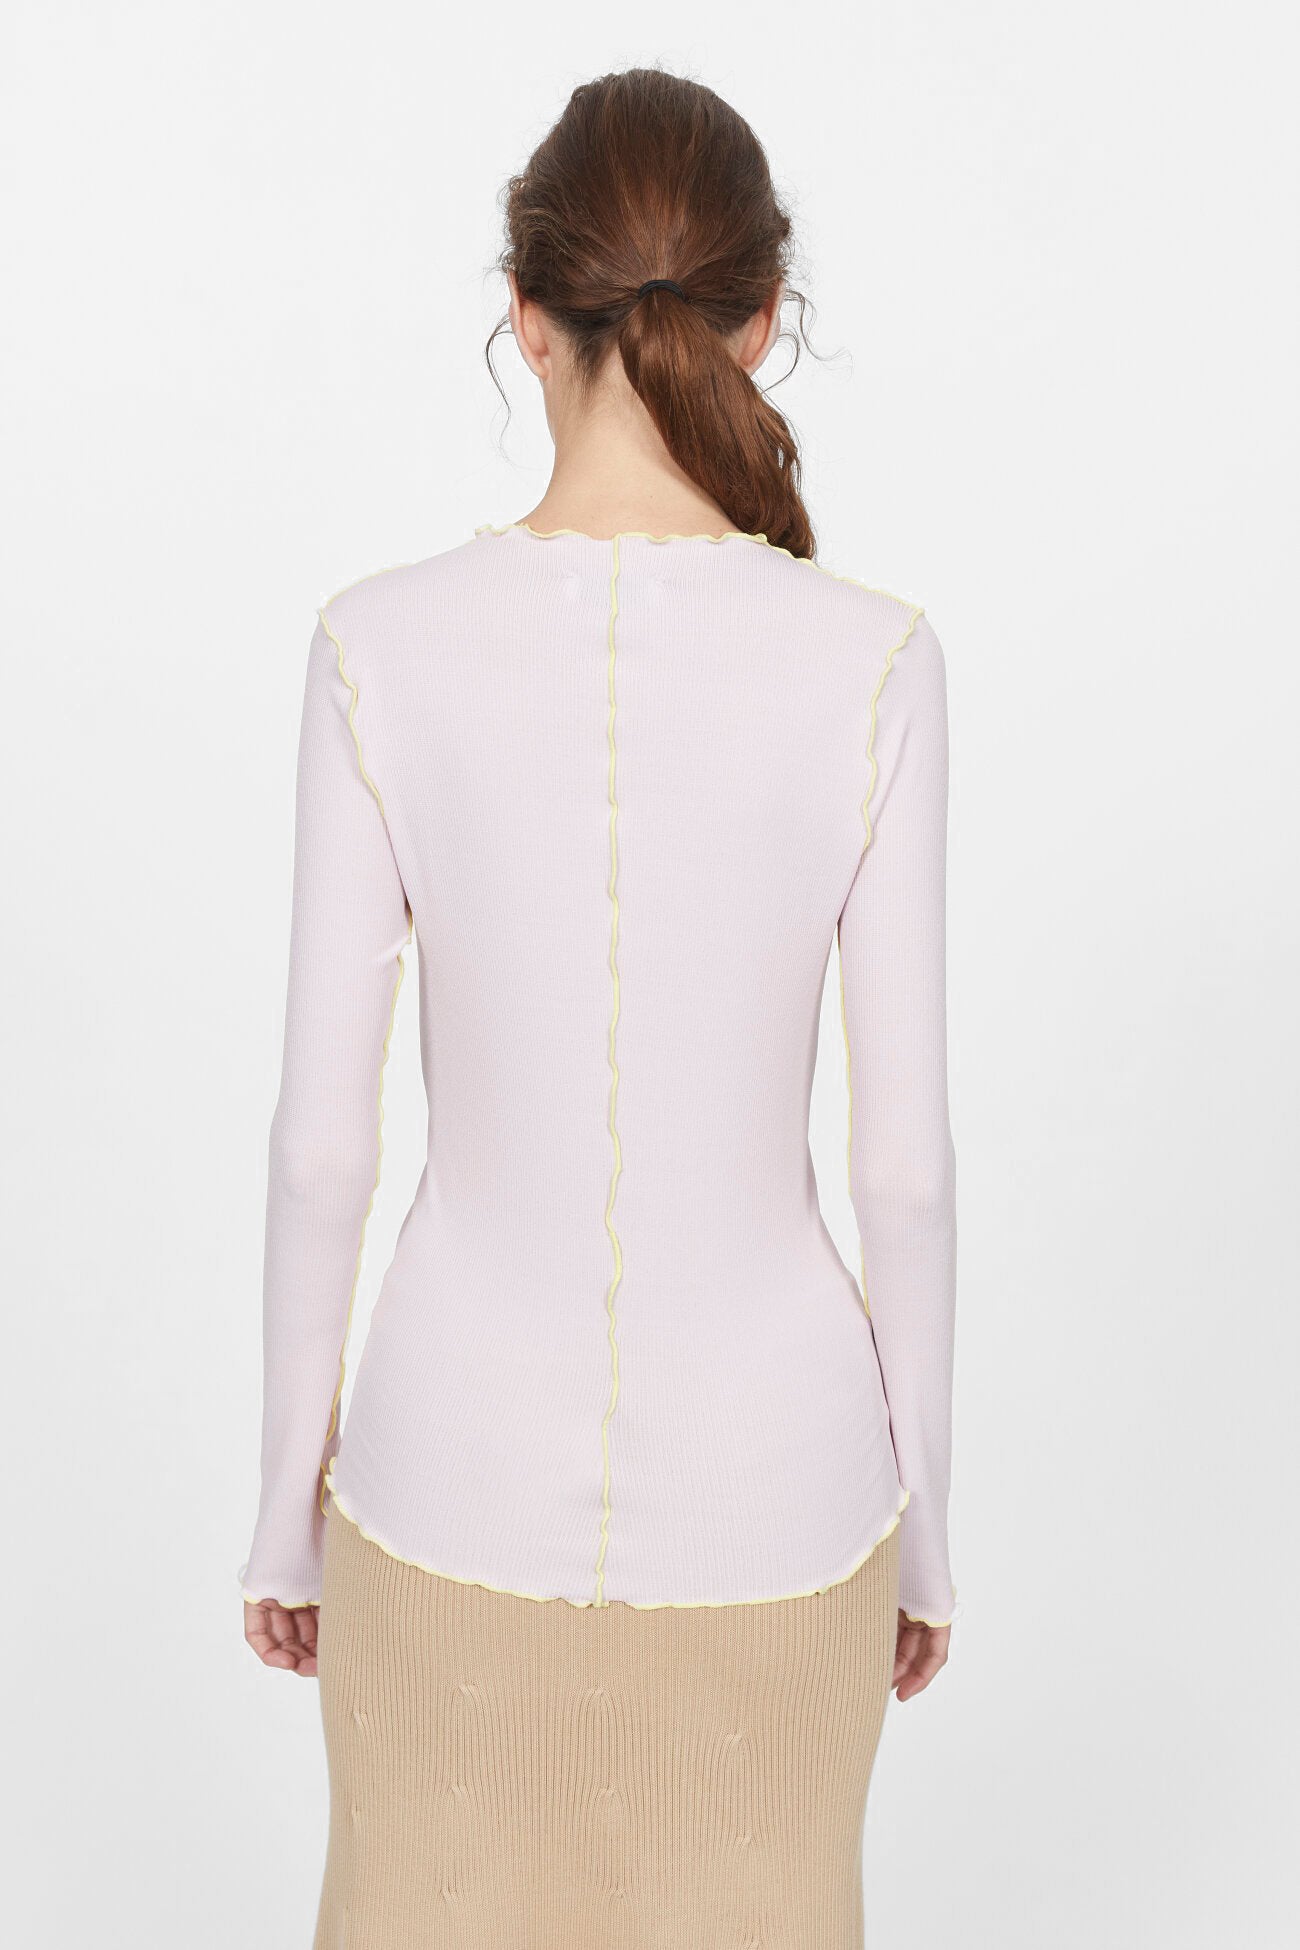 Columbina Top in Quartz Pink by Rodebjer